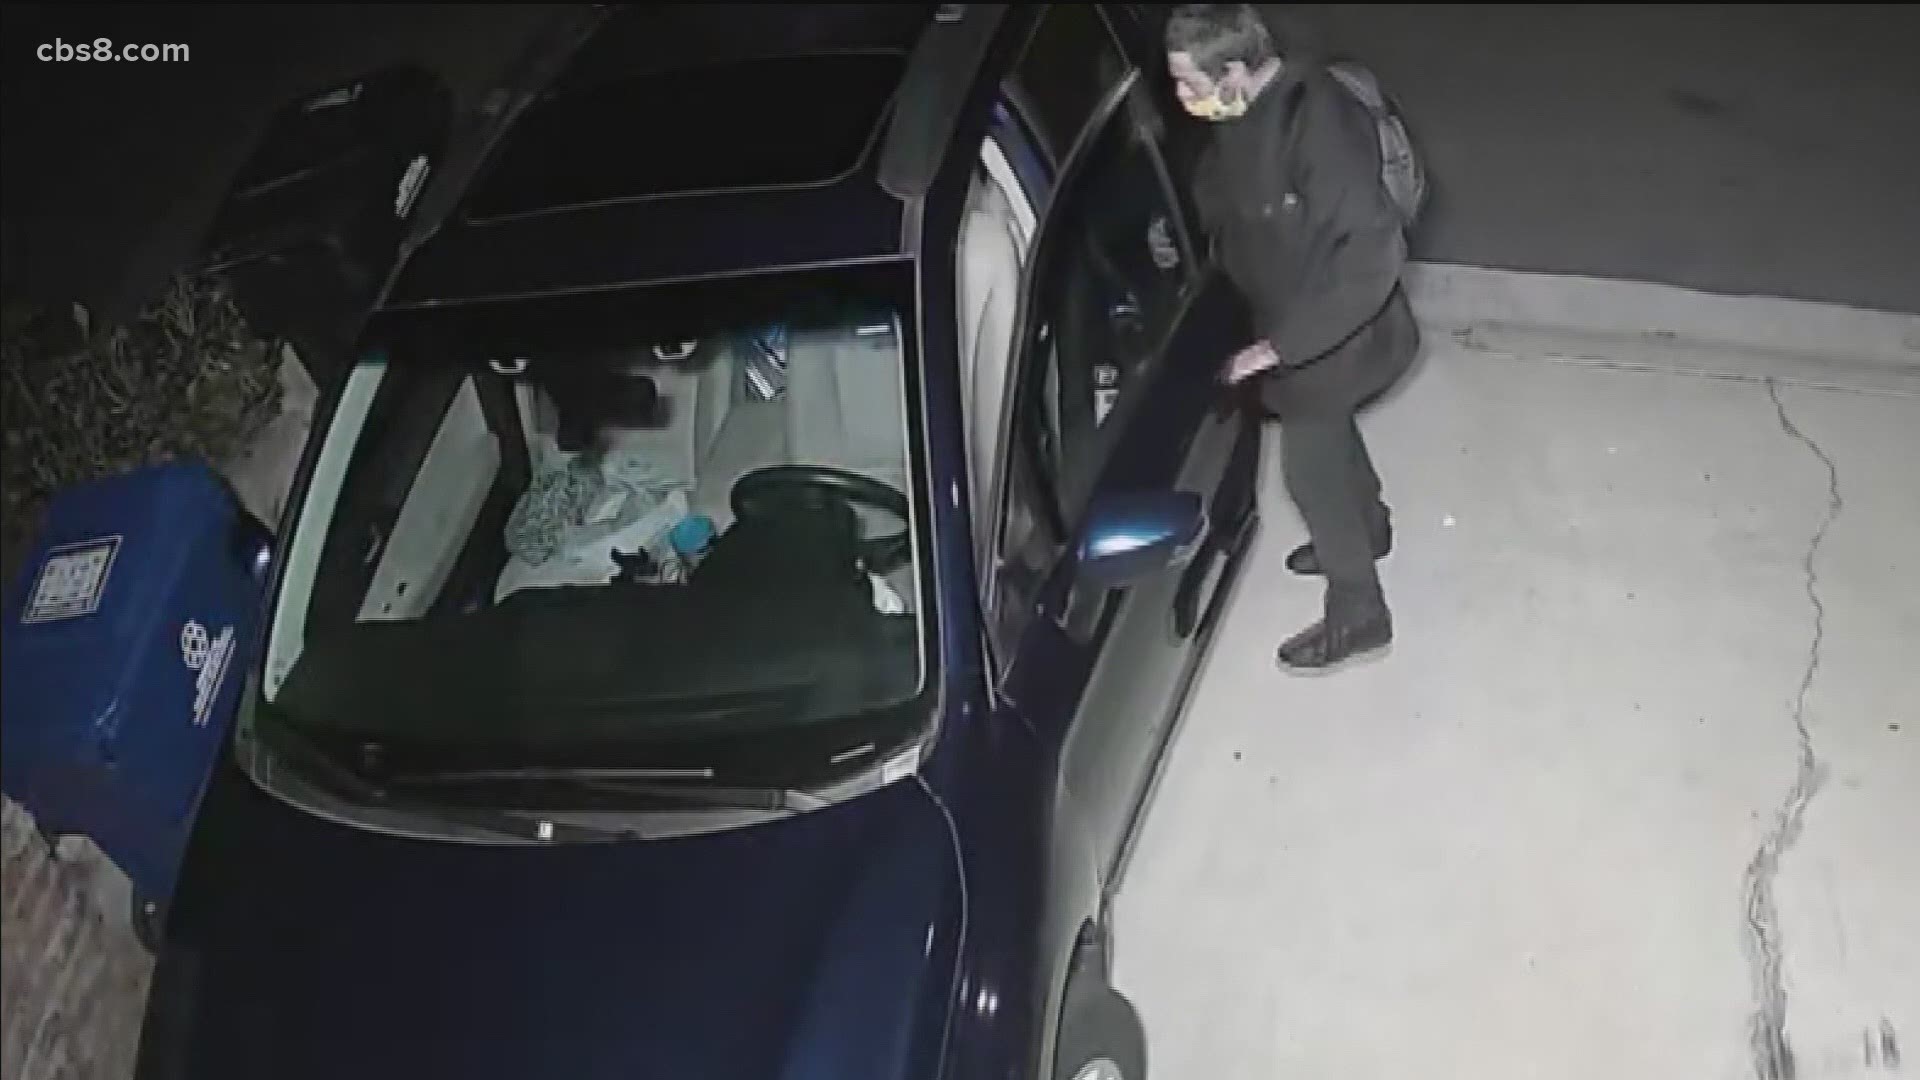 Criminals are using a device to intercept a keyless remote to break into cars in Ocean Beach. Here's how to keep your car safe.